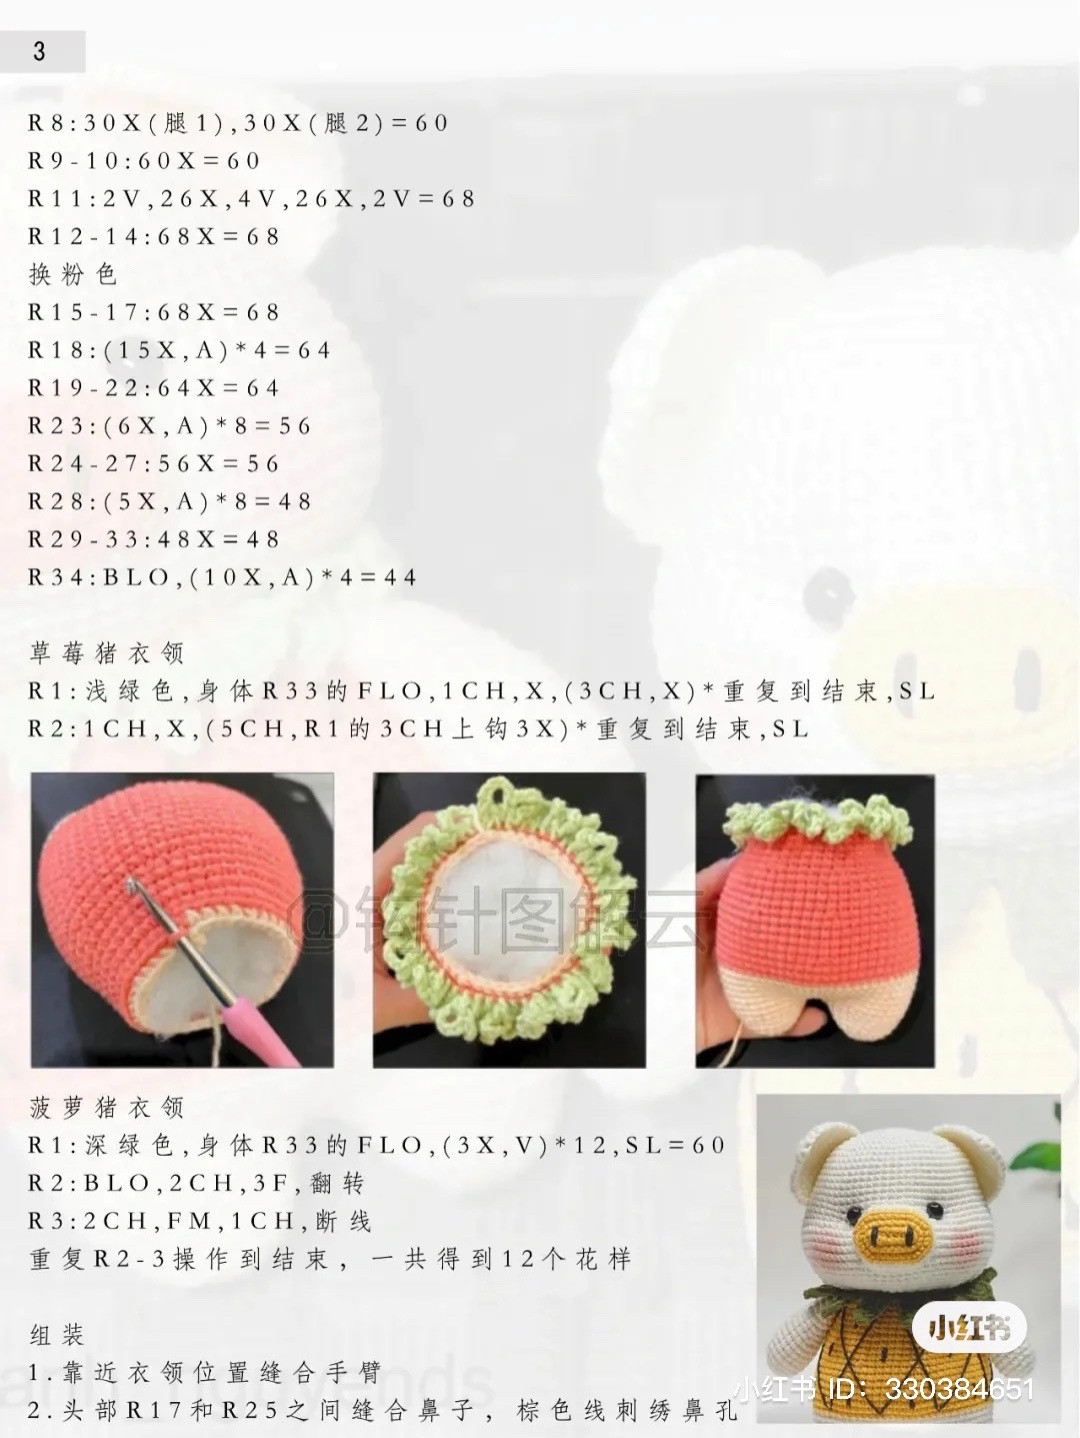 Strawberry pig and pineapple pig crochet patterns